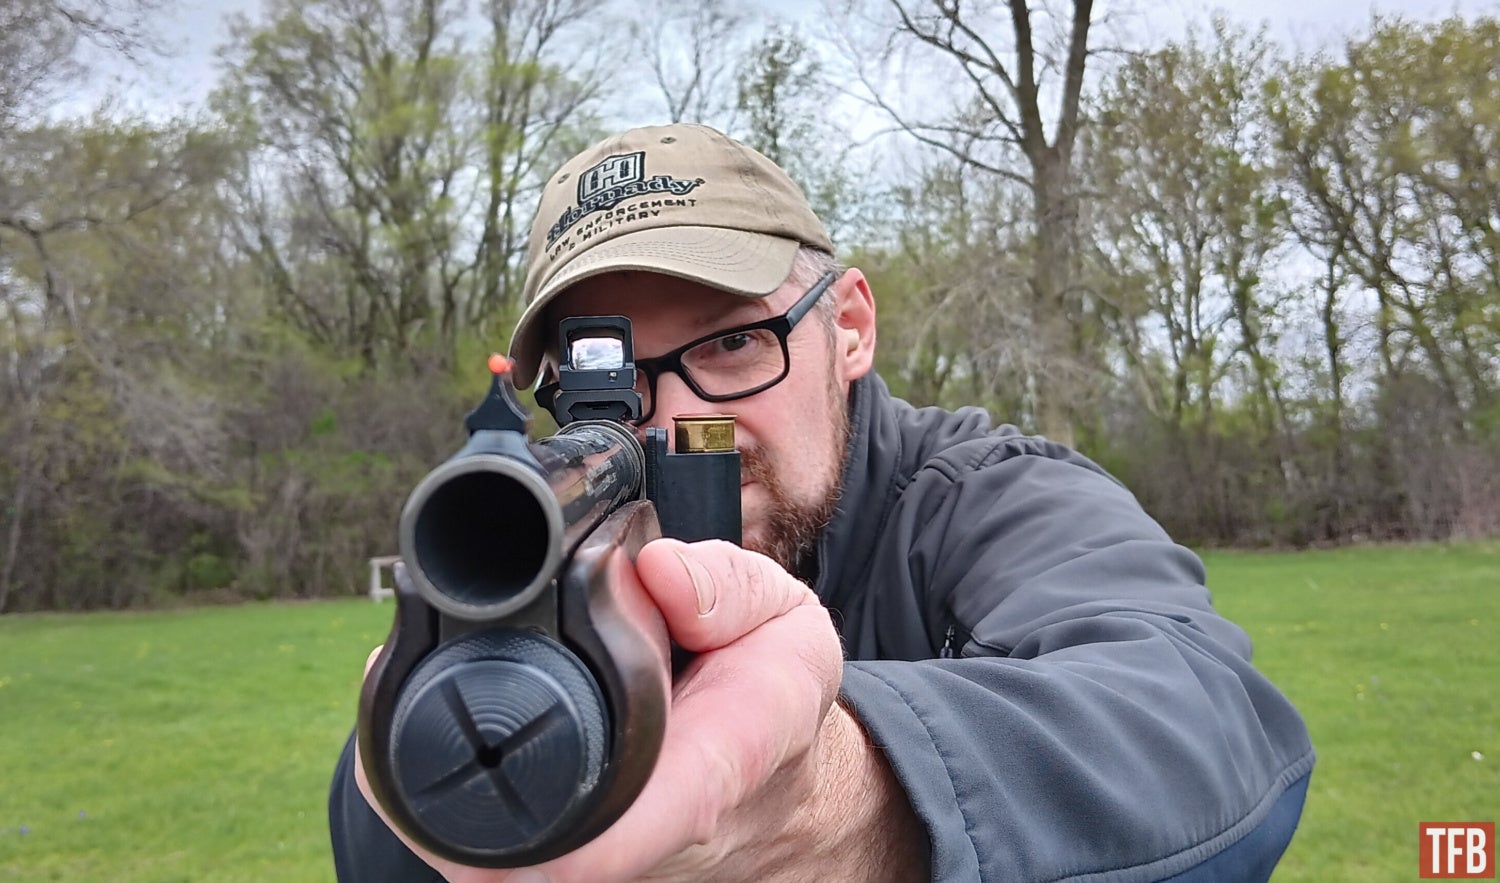 Meprolight MPO-S Micro Red Dot Sight Review